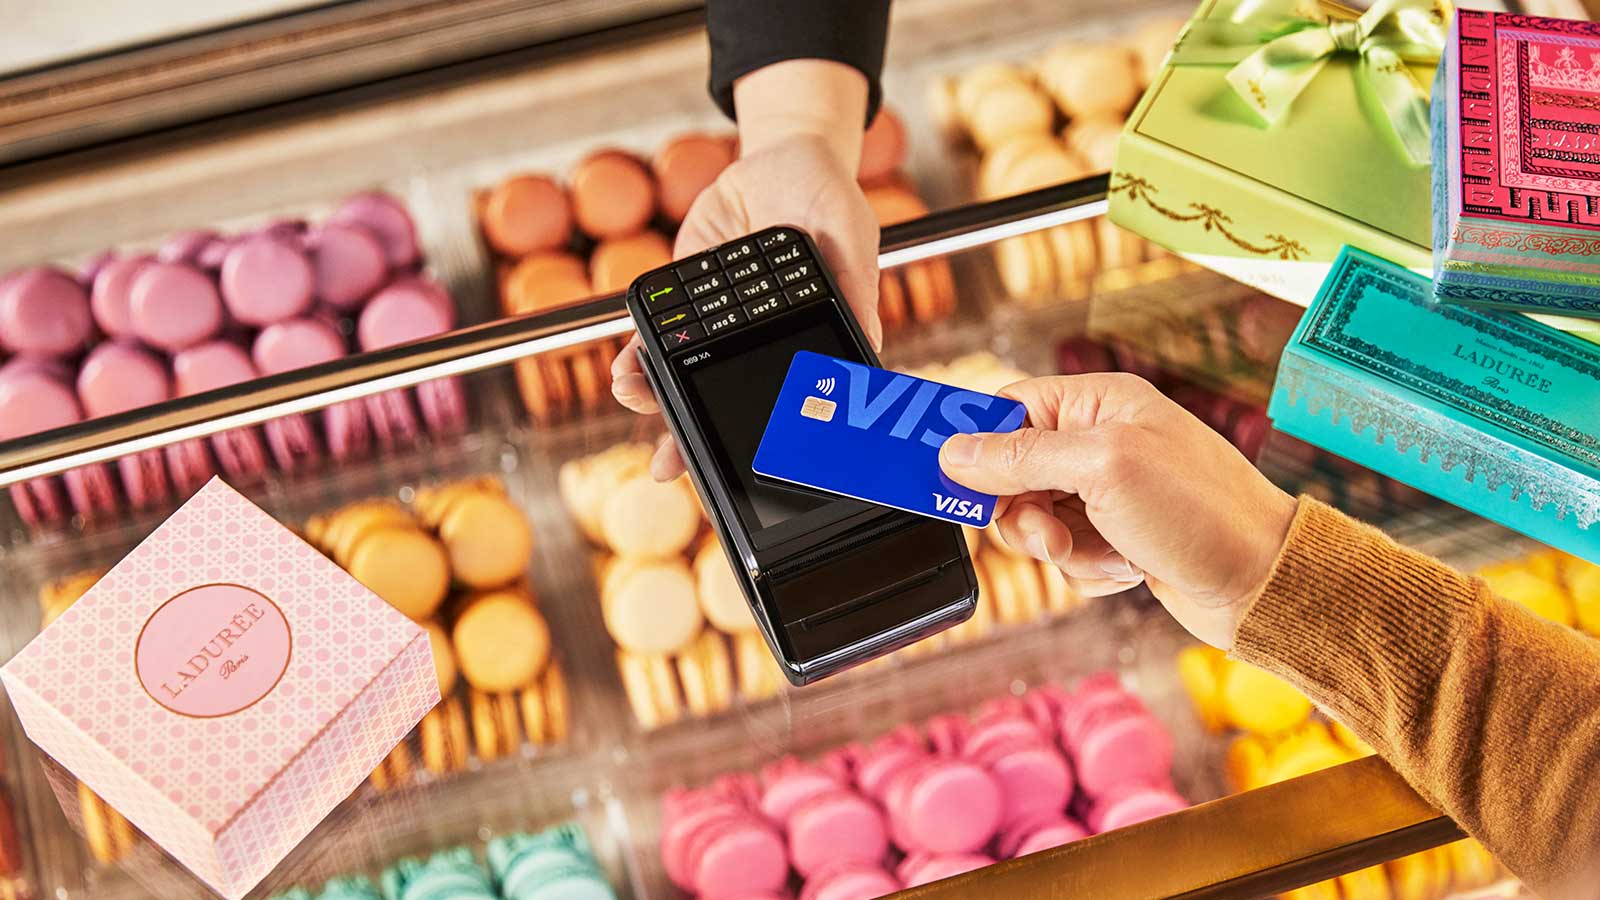 A person demonstrates contactless payments by holding a credit card in front of a display of cookies.